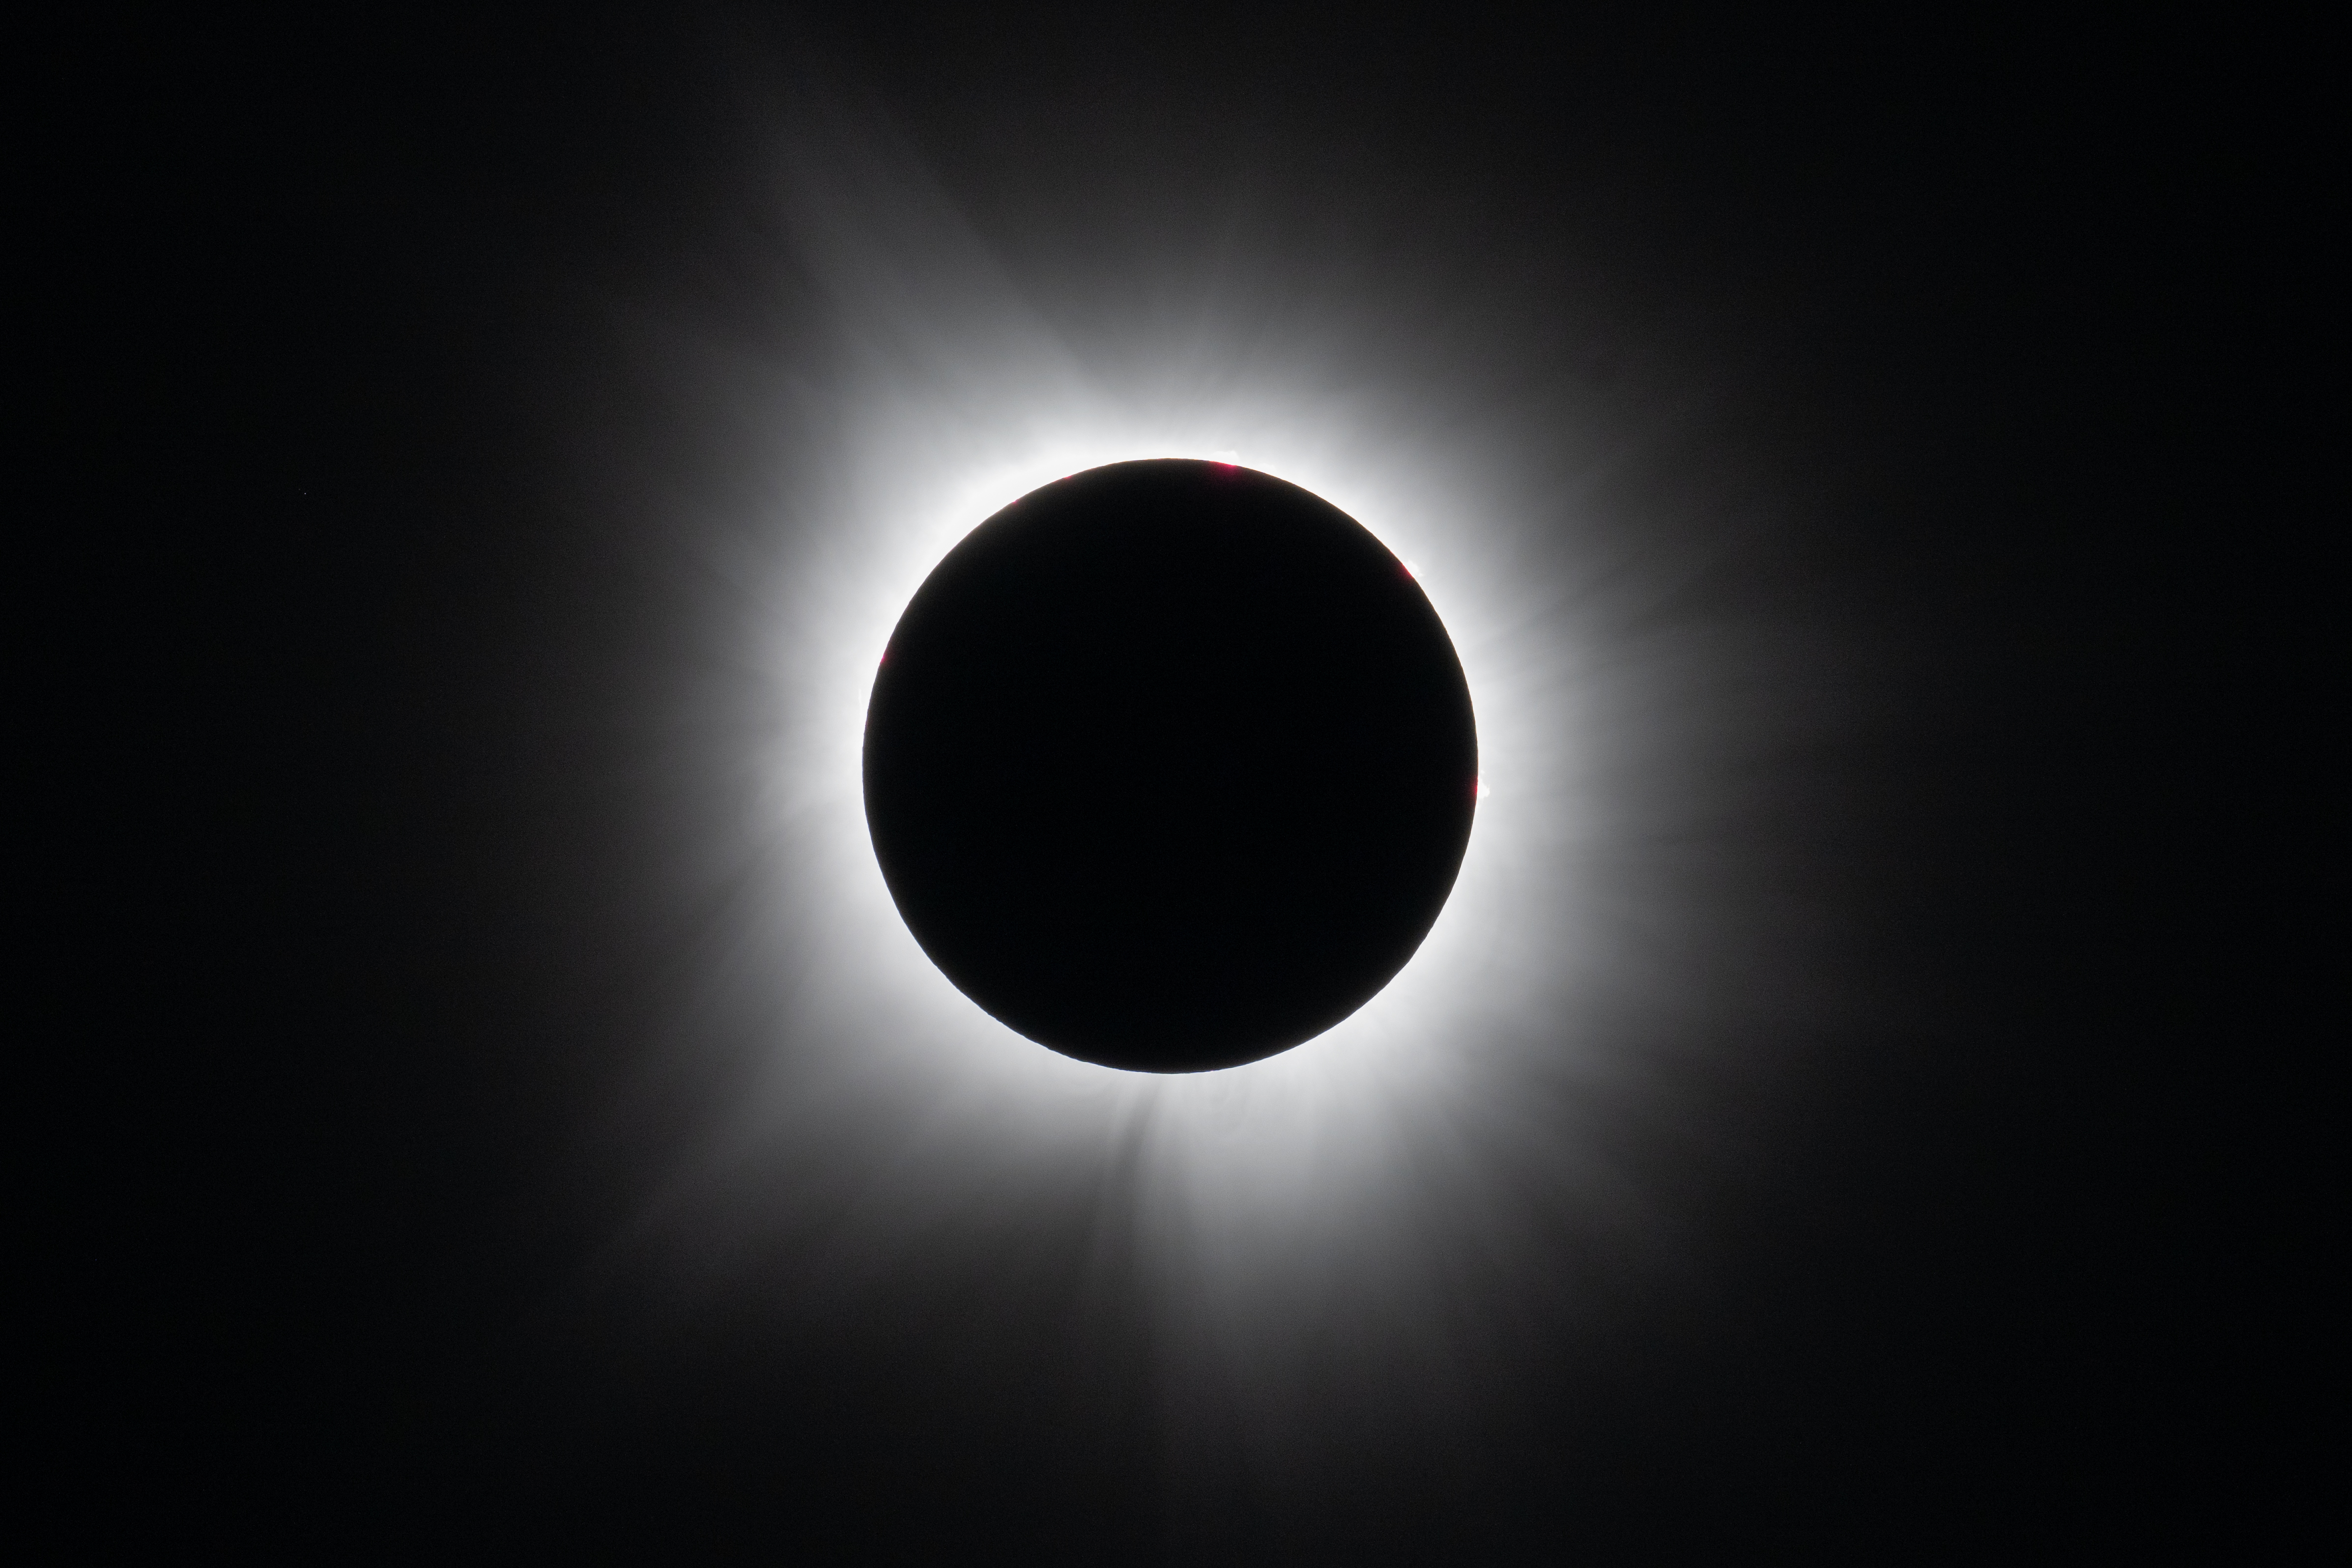 Seeing Totality